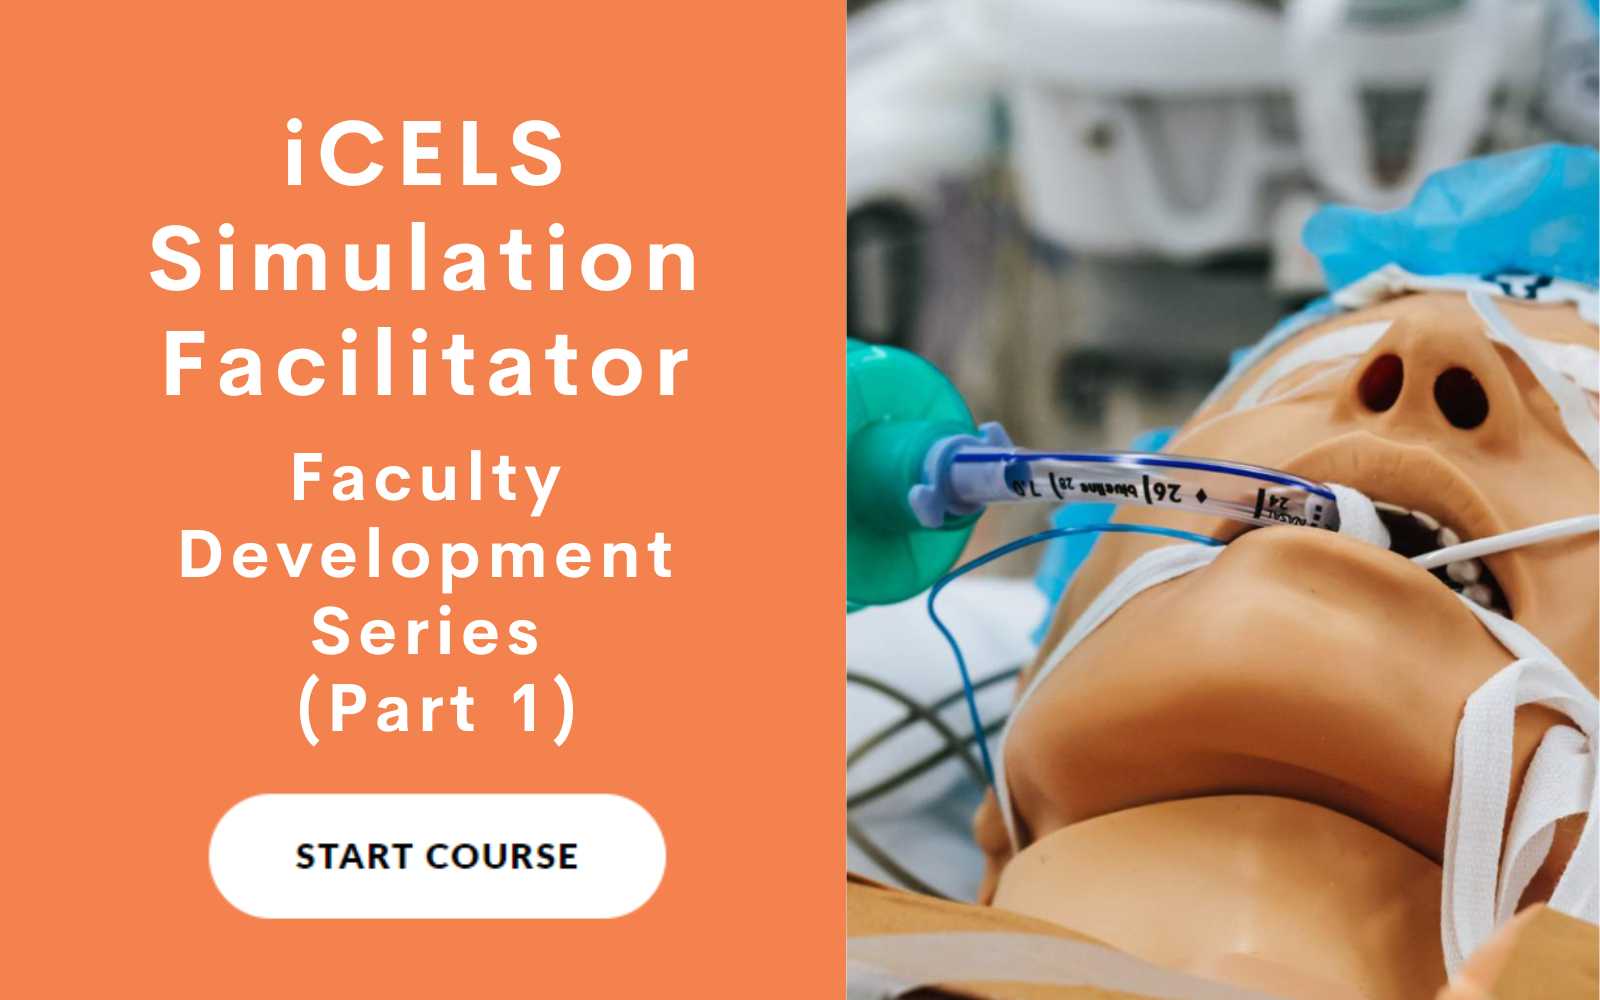 iCELS-course-simulation-facilitator-faculty-development-series-part-1.